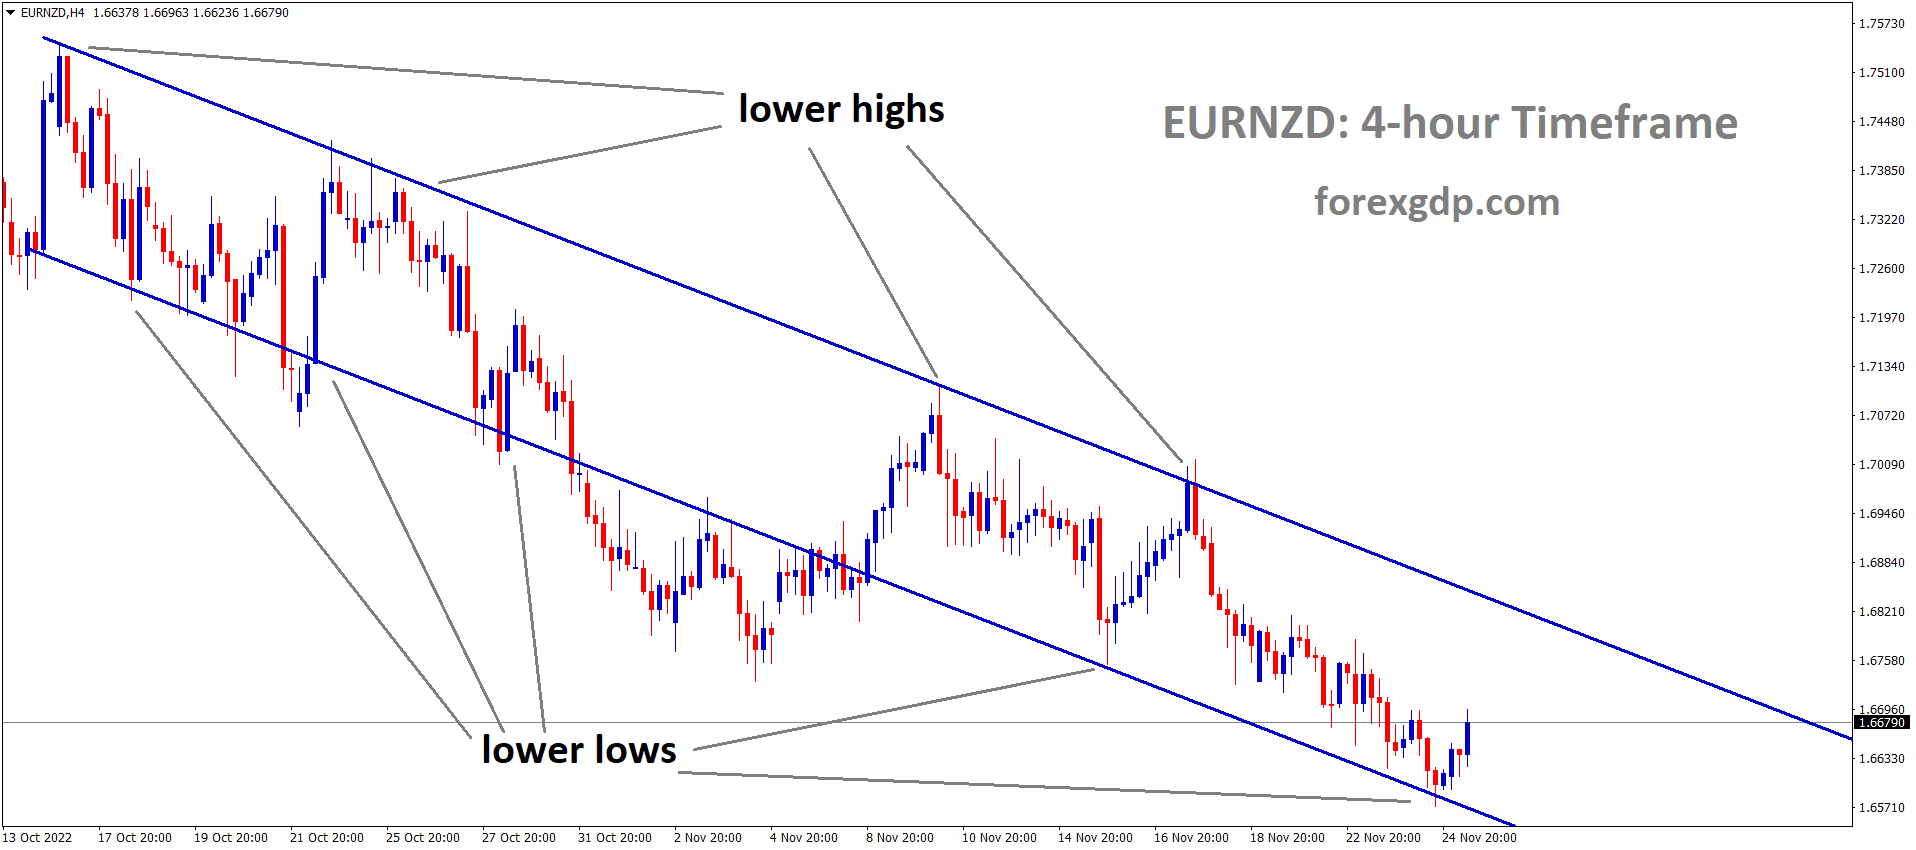 EURNZD is moving in the Descending channel and the market has rebounded from the lower low area of the channel